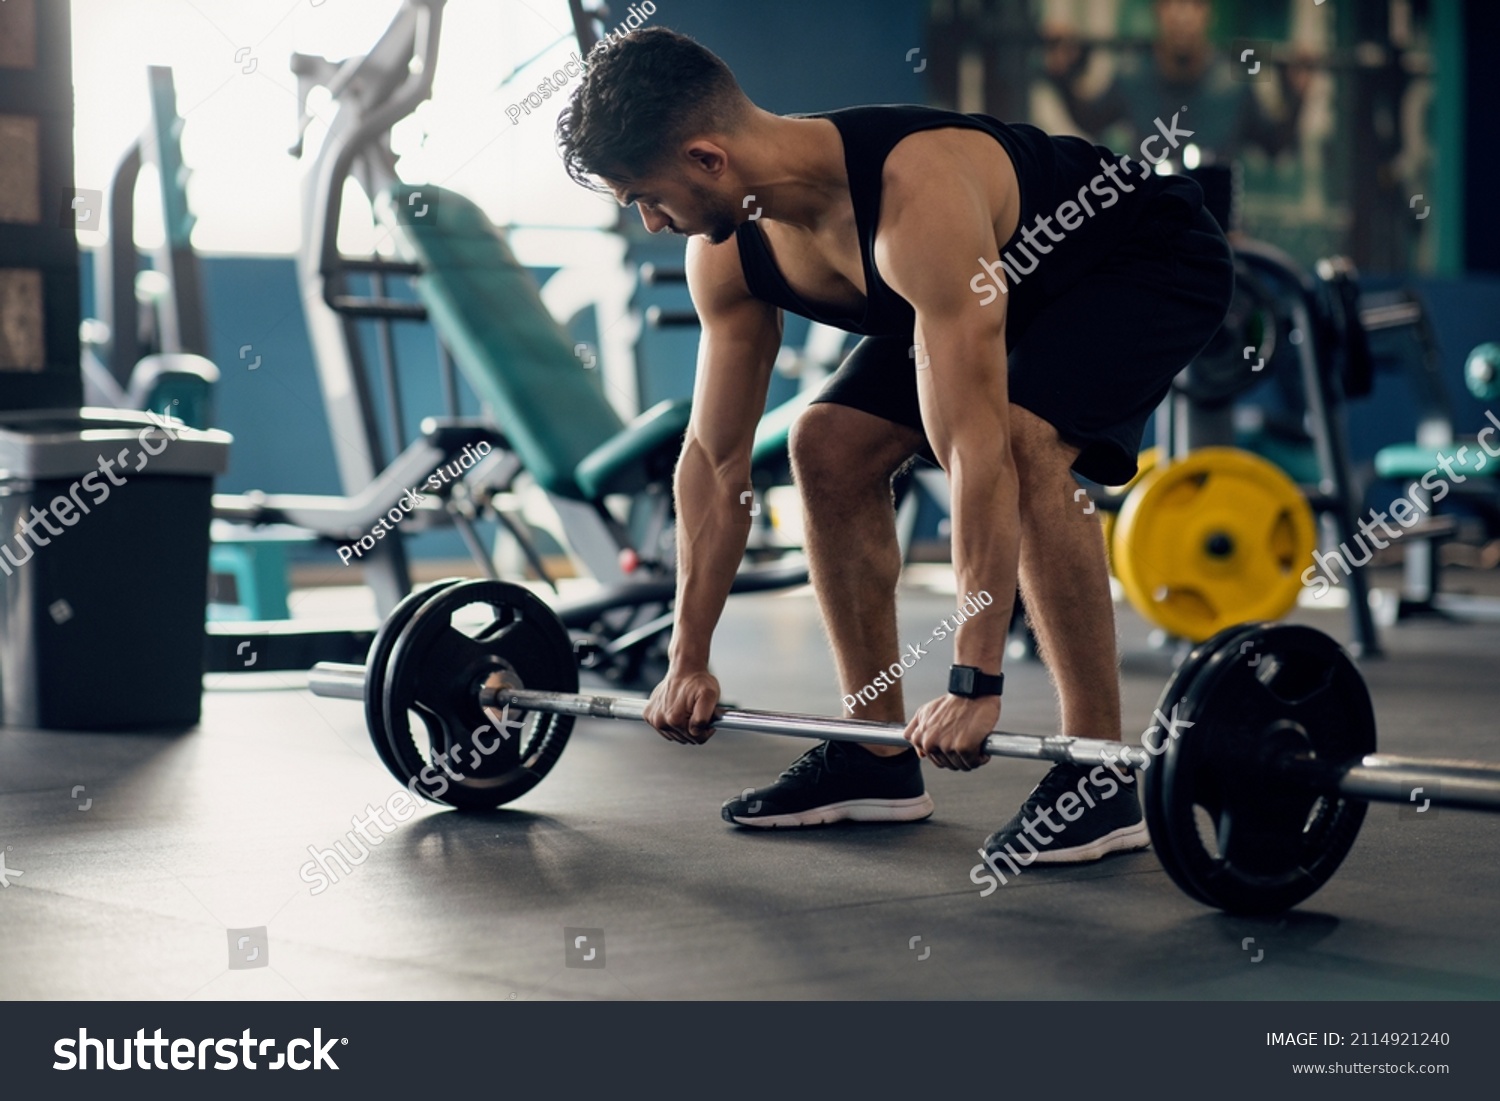 Portrait Of Muscular Middle Eastern Guy Making Deadlift Workout At Modern Gym, Young Arab Male Athlete Lifting Heavy Barbell At Sport Club Interior, Training Muscle Endurance, Closeup Shot #2114921240